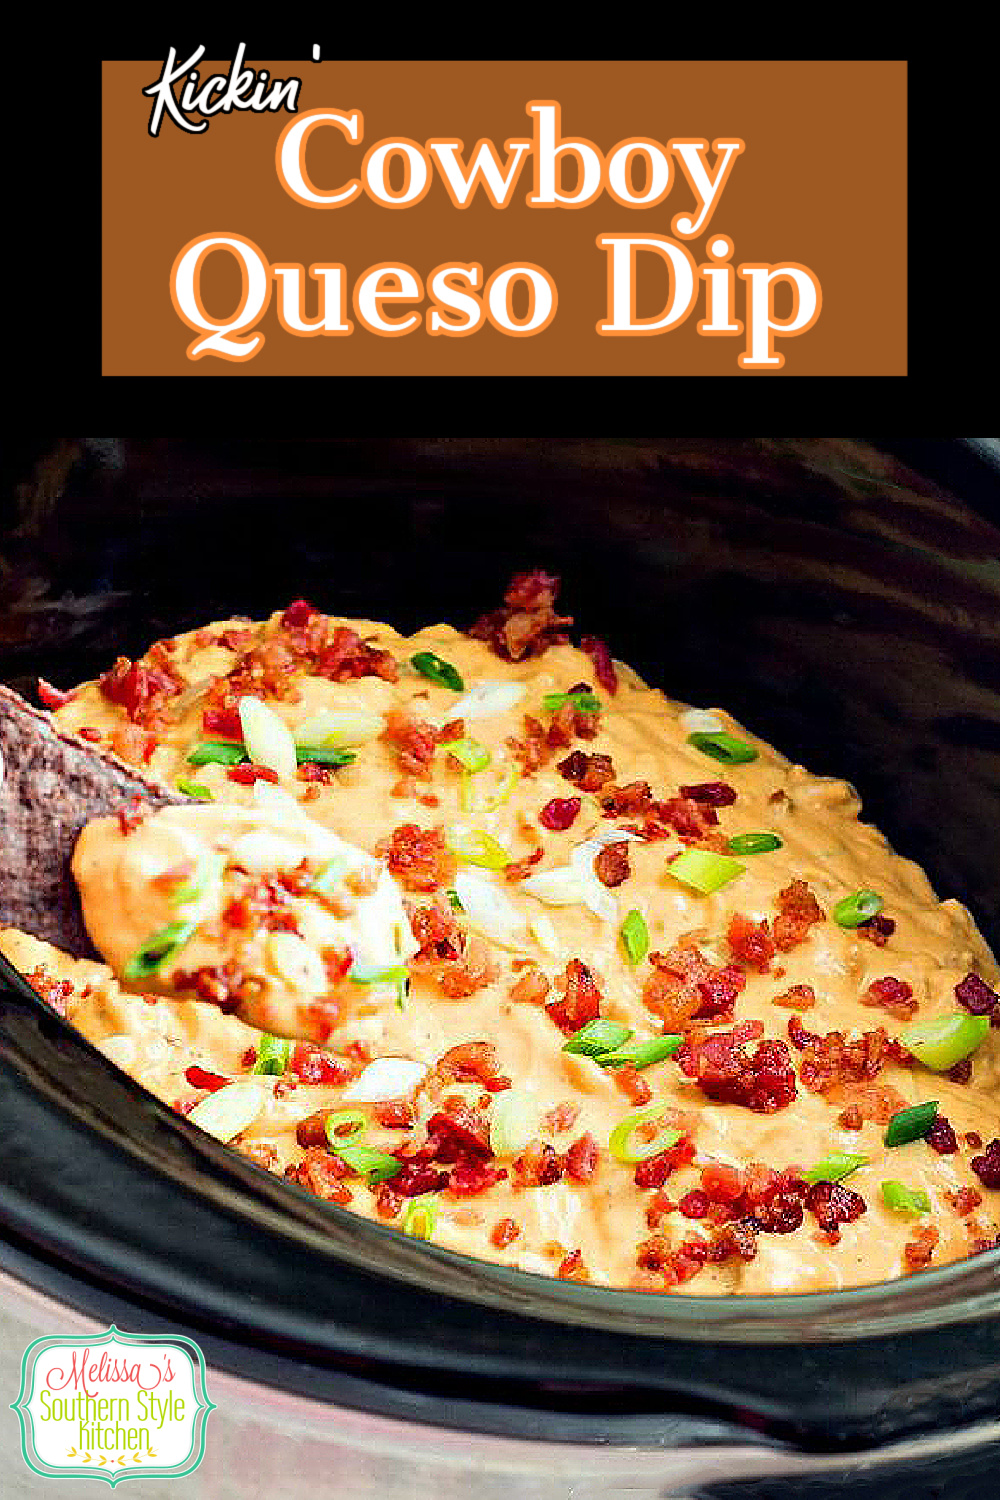 Simmer this flavorful Kickin' Cowboy Queso Dip in your slow cooker #queso #quesodip #diprecipes #cheesedip #cheese #easyrecipes #footballfood #partyfood #appetizers #crockpotrecipes #slowcookerrecipes